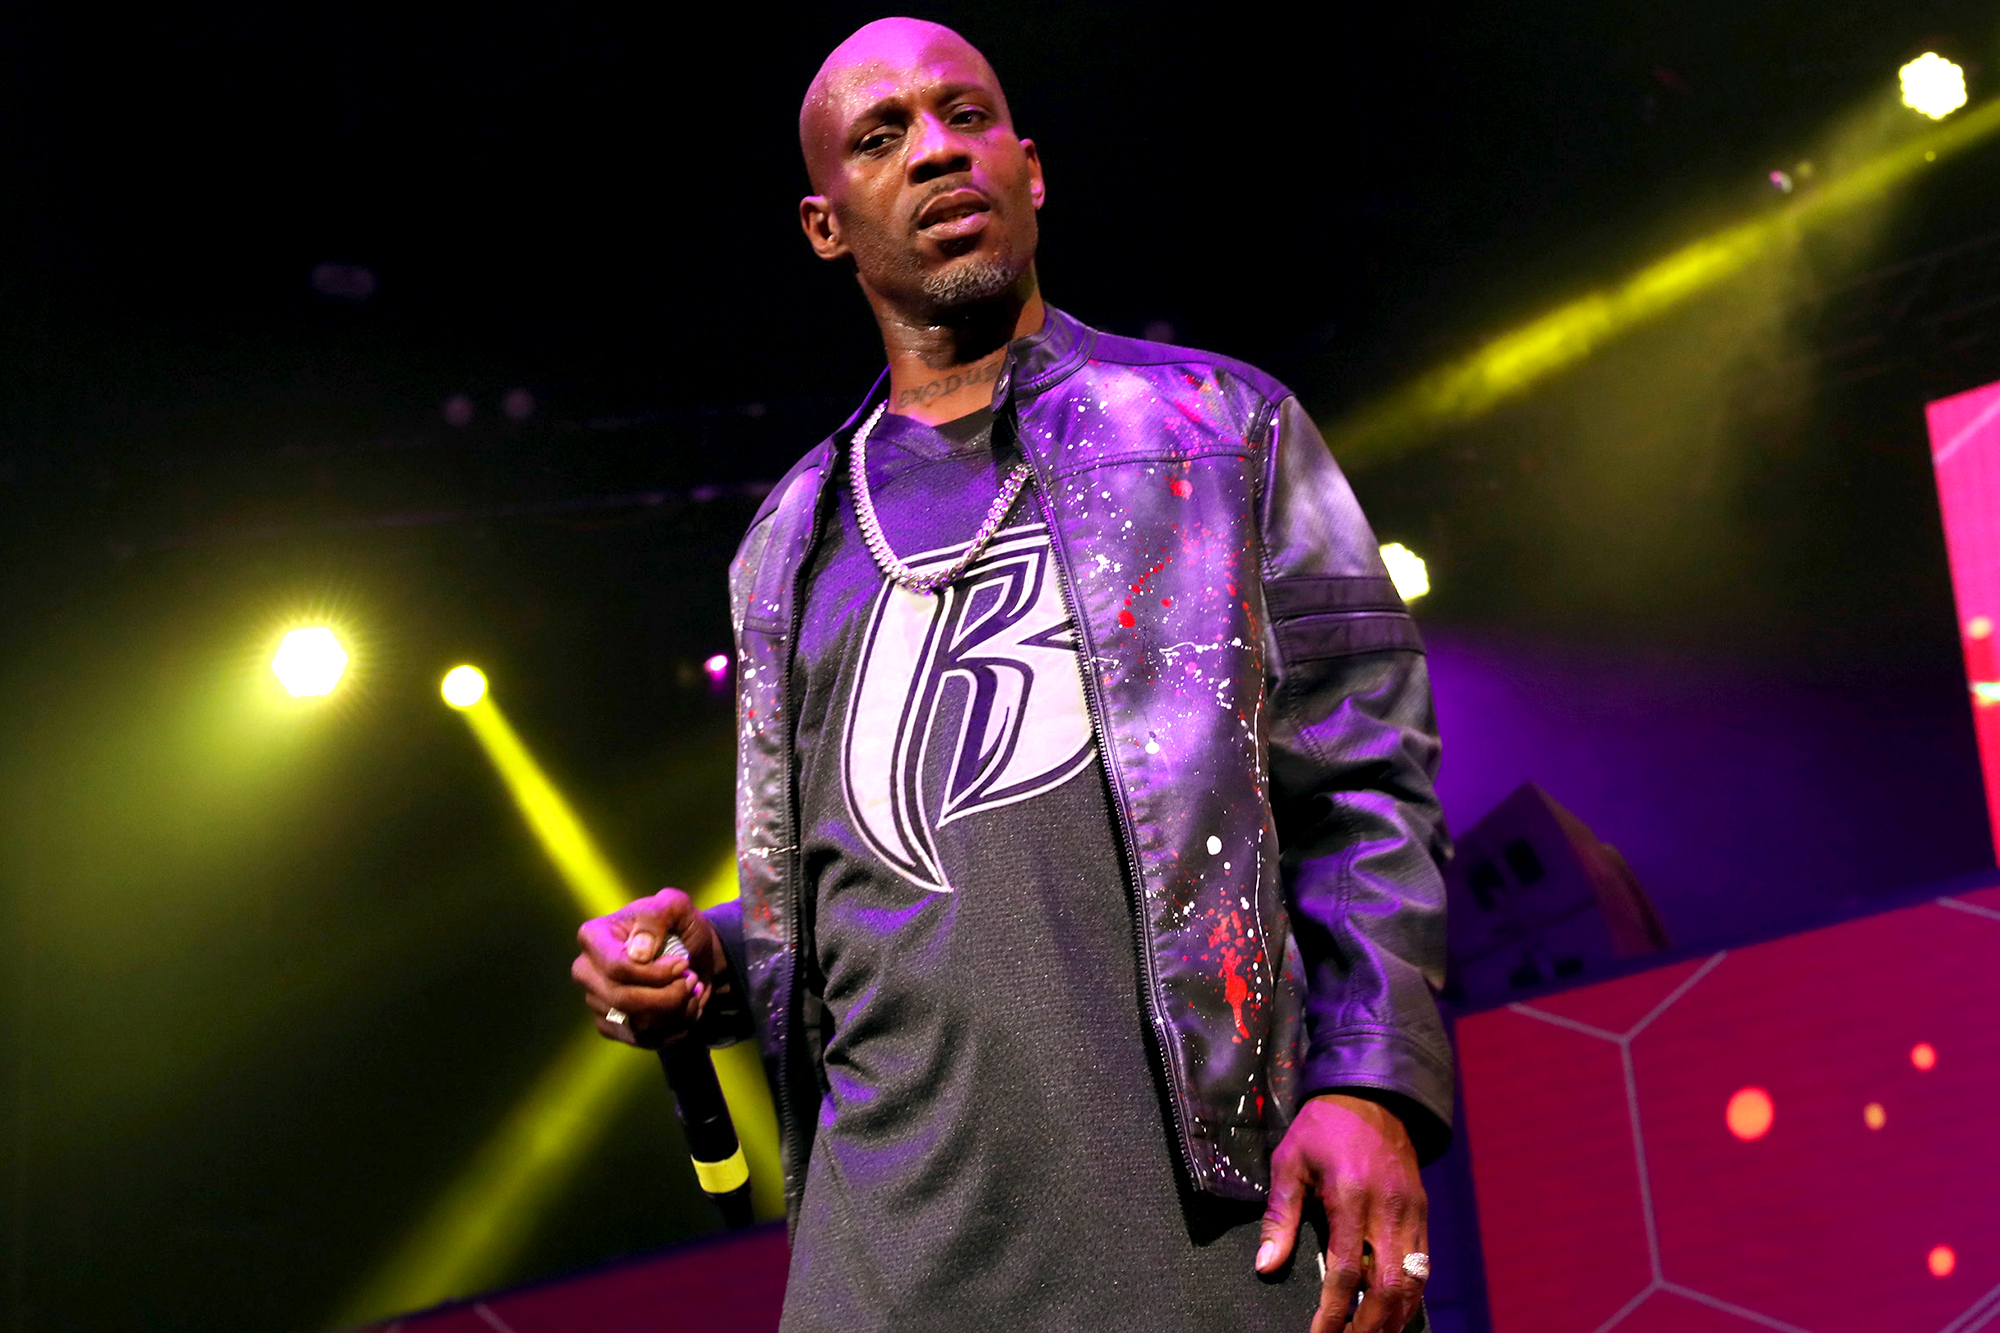 DMX's Family to Hold Prayer Vigil Outside of New York Hospital Where He Remains on Life Support